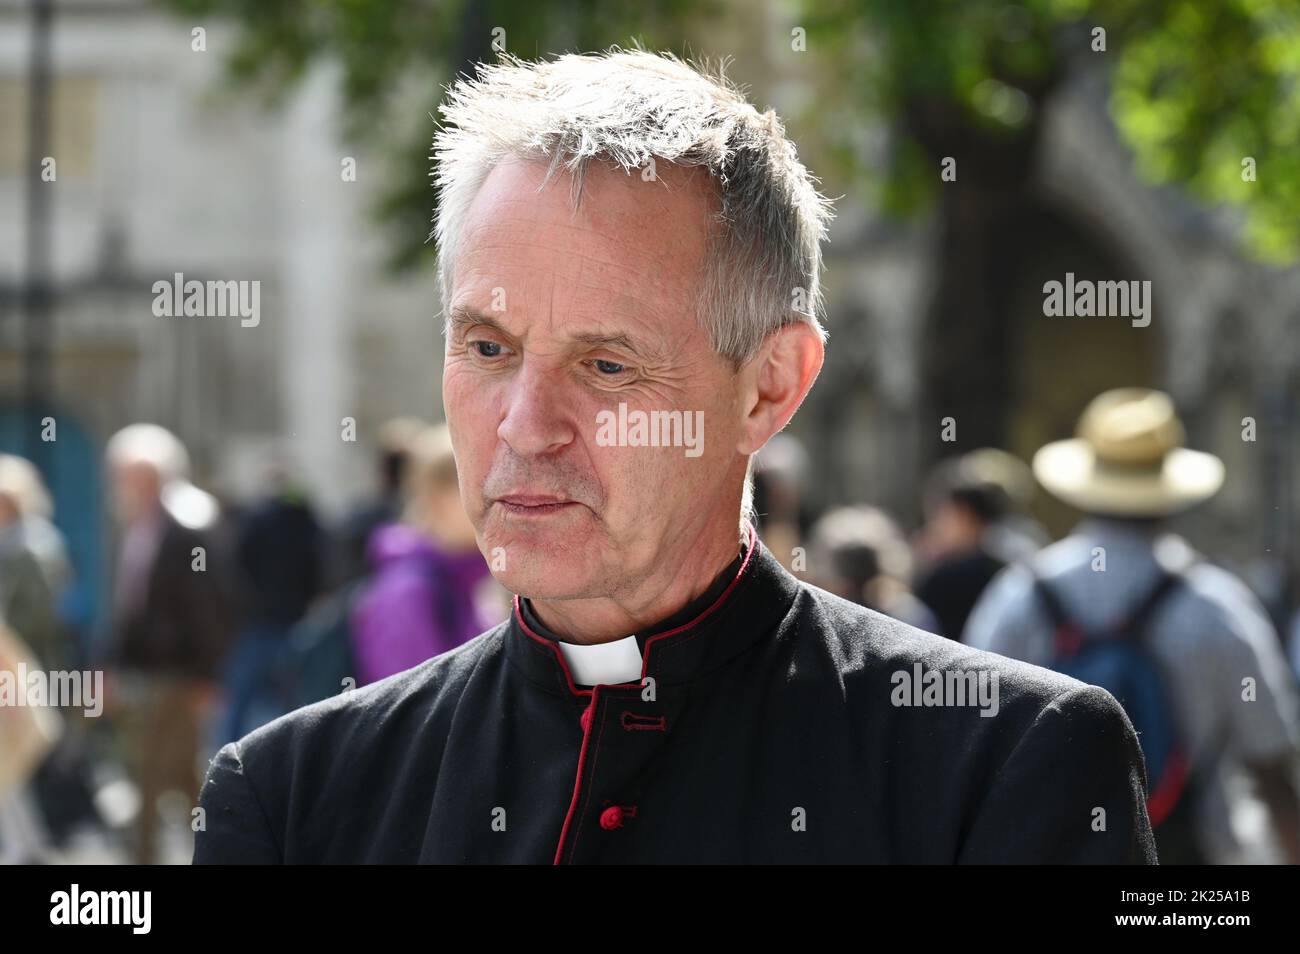 London, UK. Giles Goddard - Vicar of St John's Waterloo. Rally in Parliament Square to highlight the severe impacts of climate change already affecting communities around the world. Stock Photo